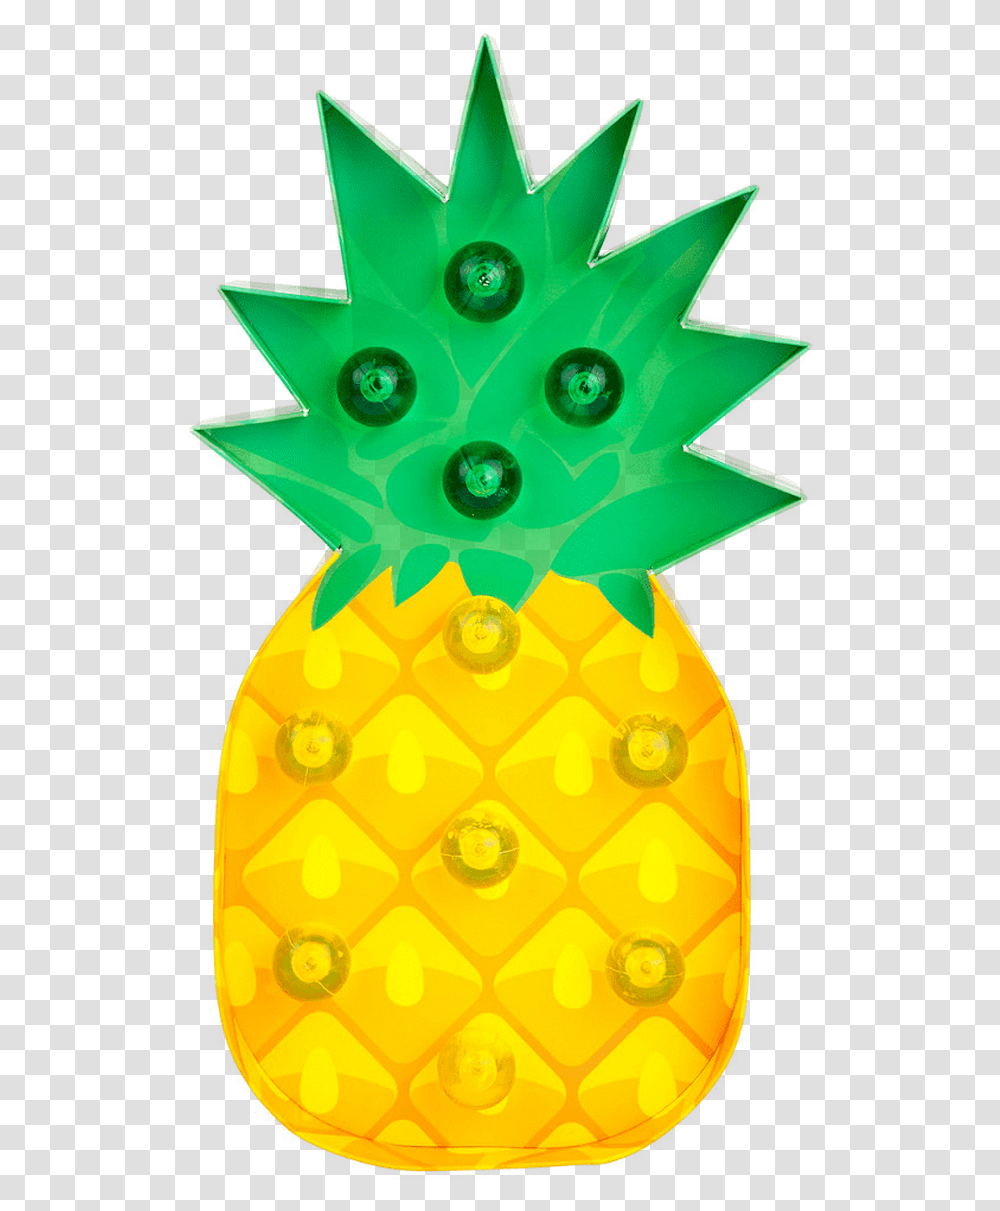 Pineapple Marquee Light Light Up Pineapple, Plant, Fruit, Food, Birthday Cake Transparent Png